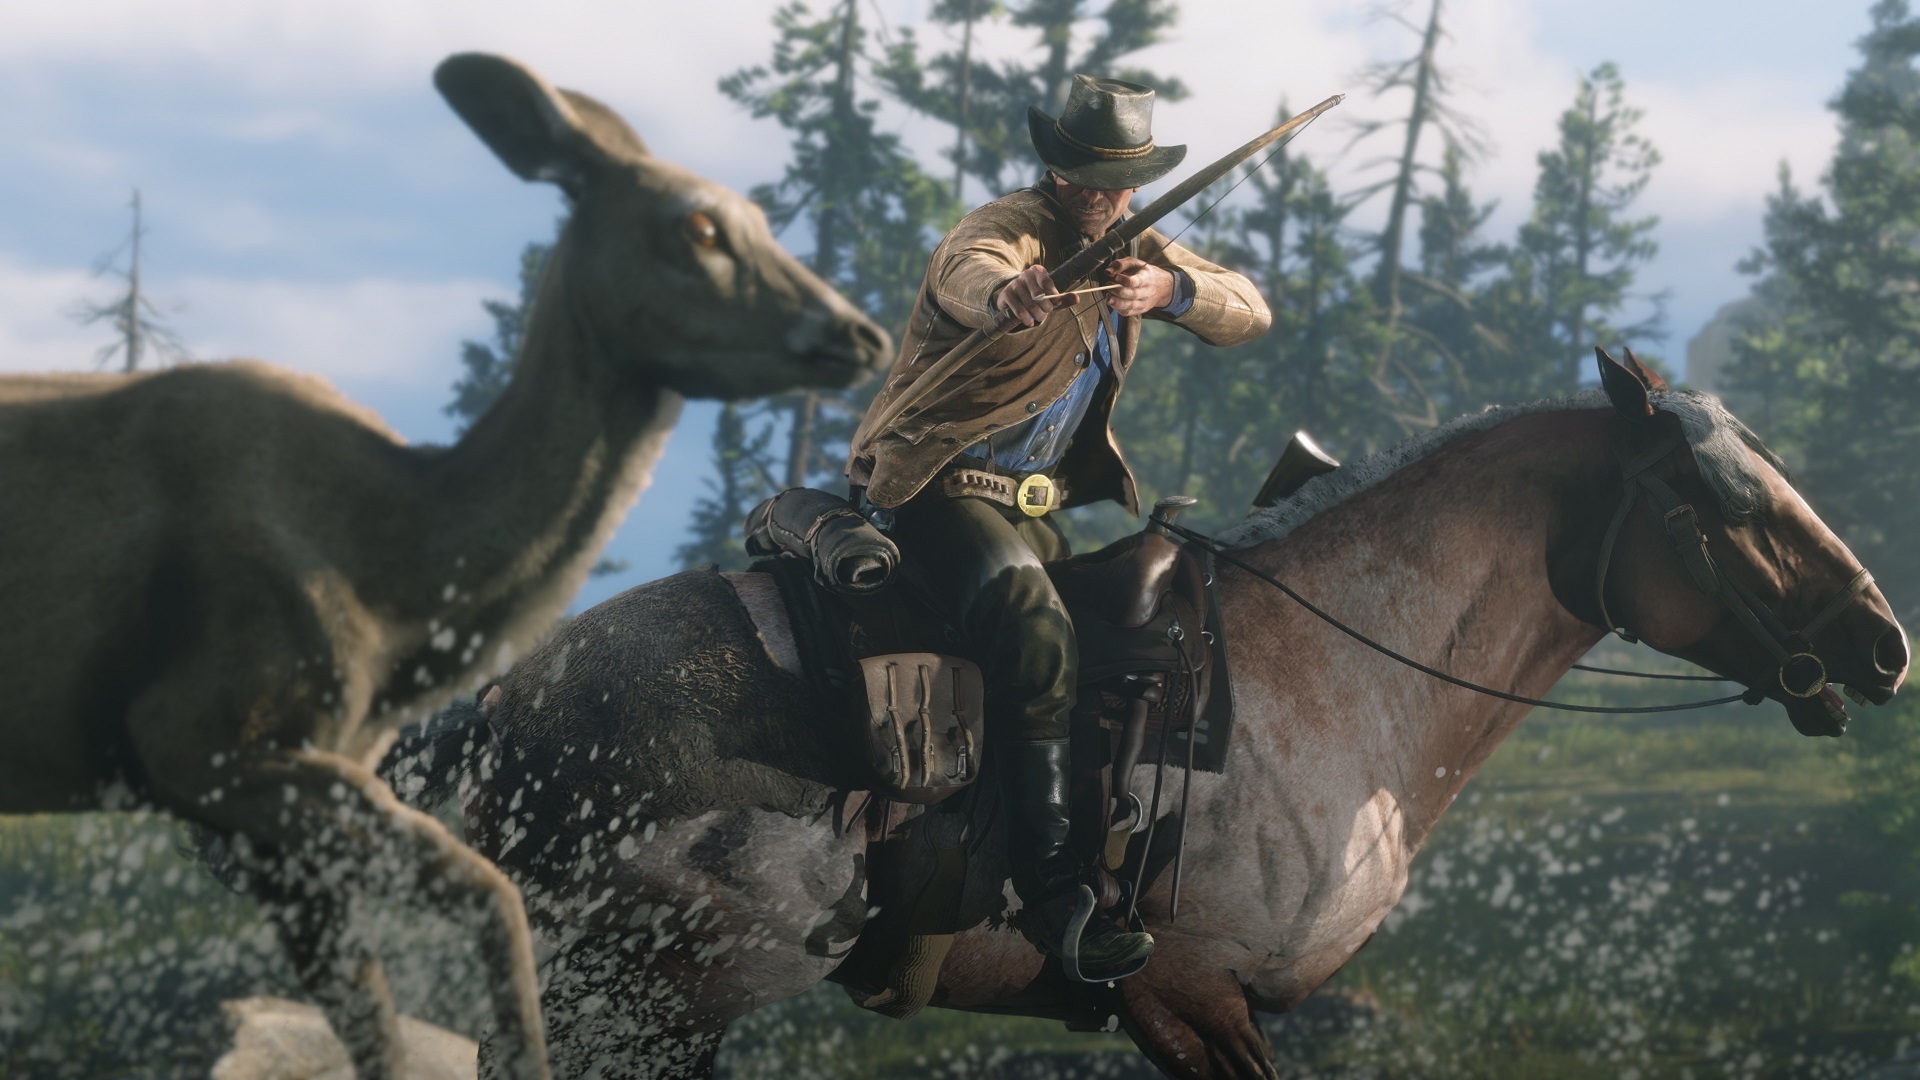 Red Dead Online: How To Play On Free-Aim Lobbies & Why You Should